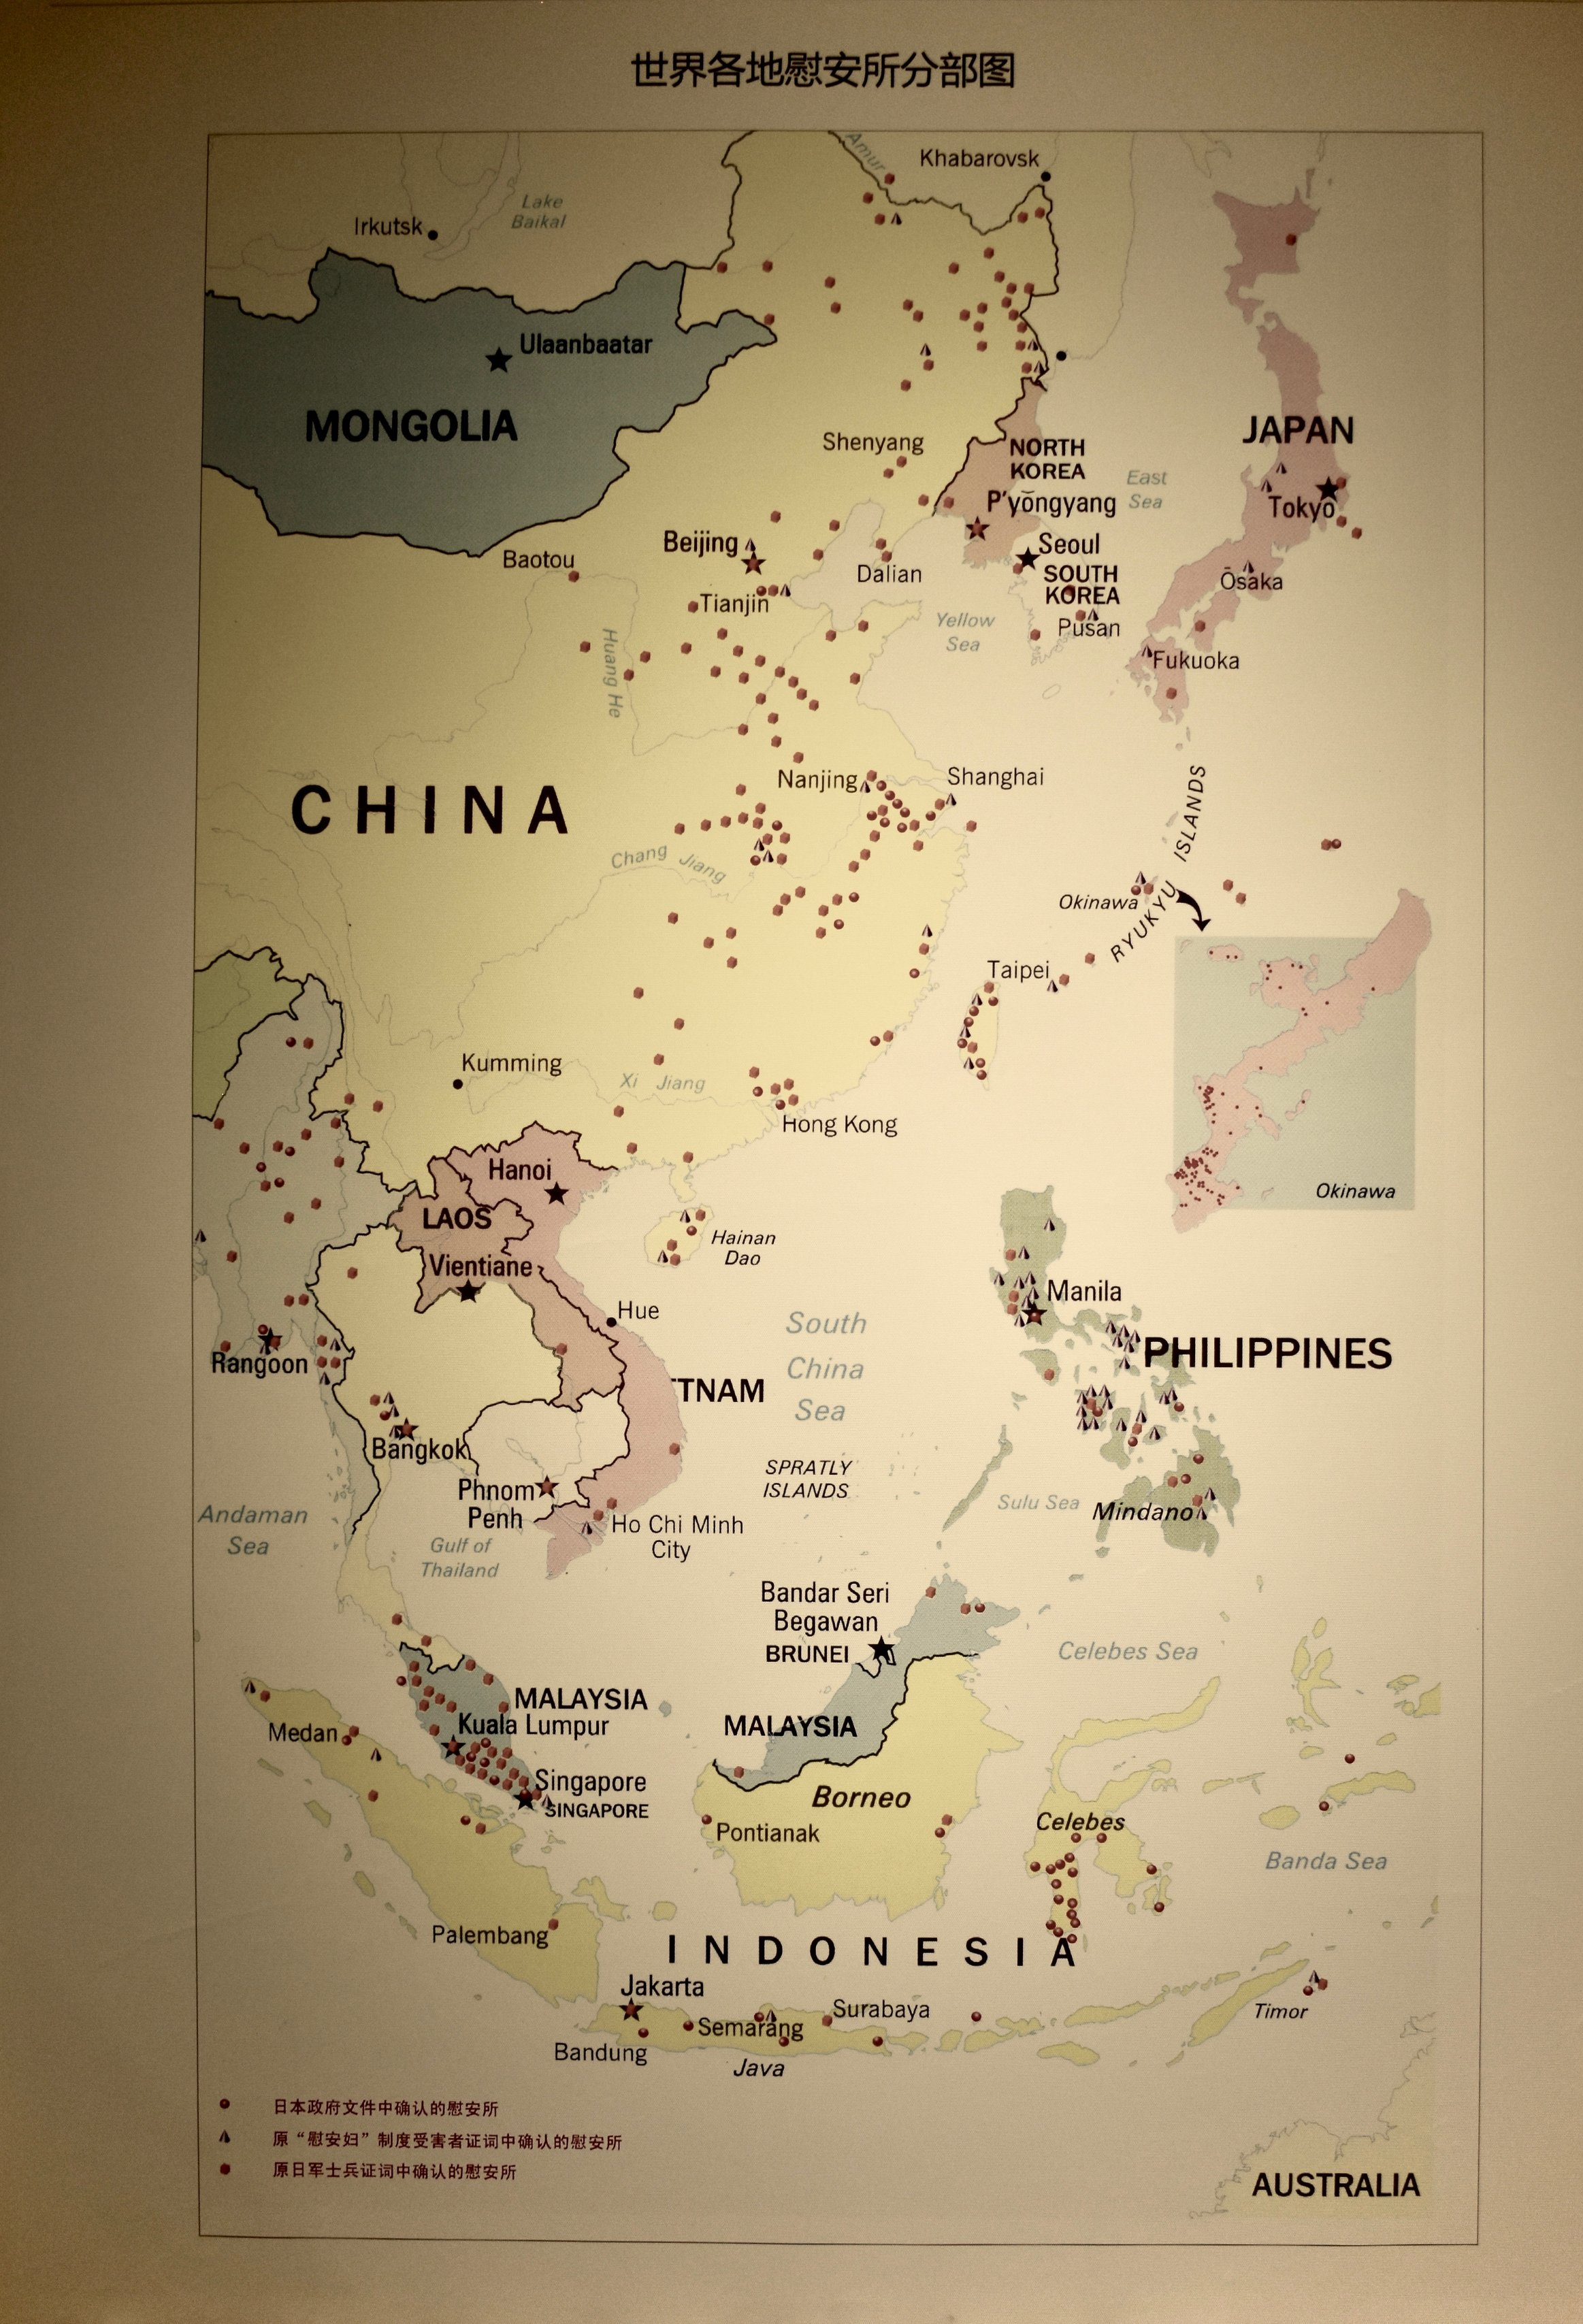 Map of Asia - red dots are known comfort station locations